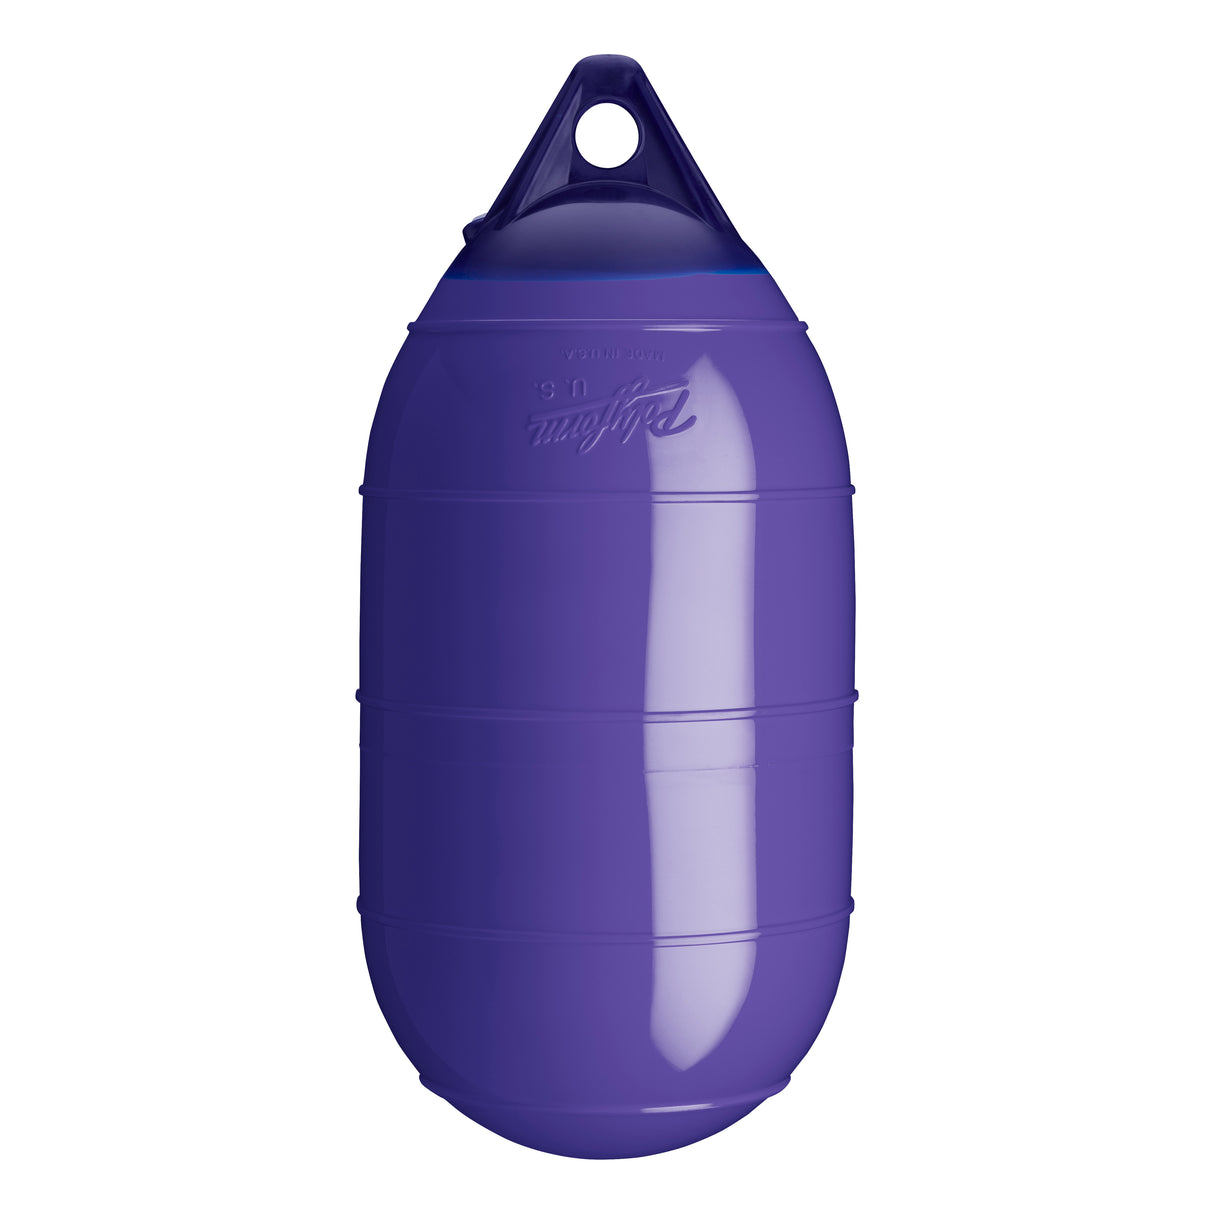 Purple inflatable low drag buoy, Polyform LD-1 